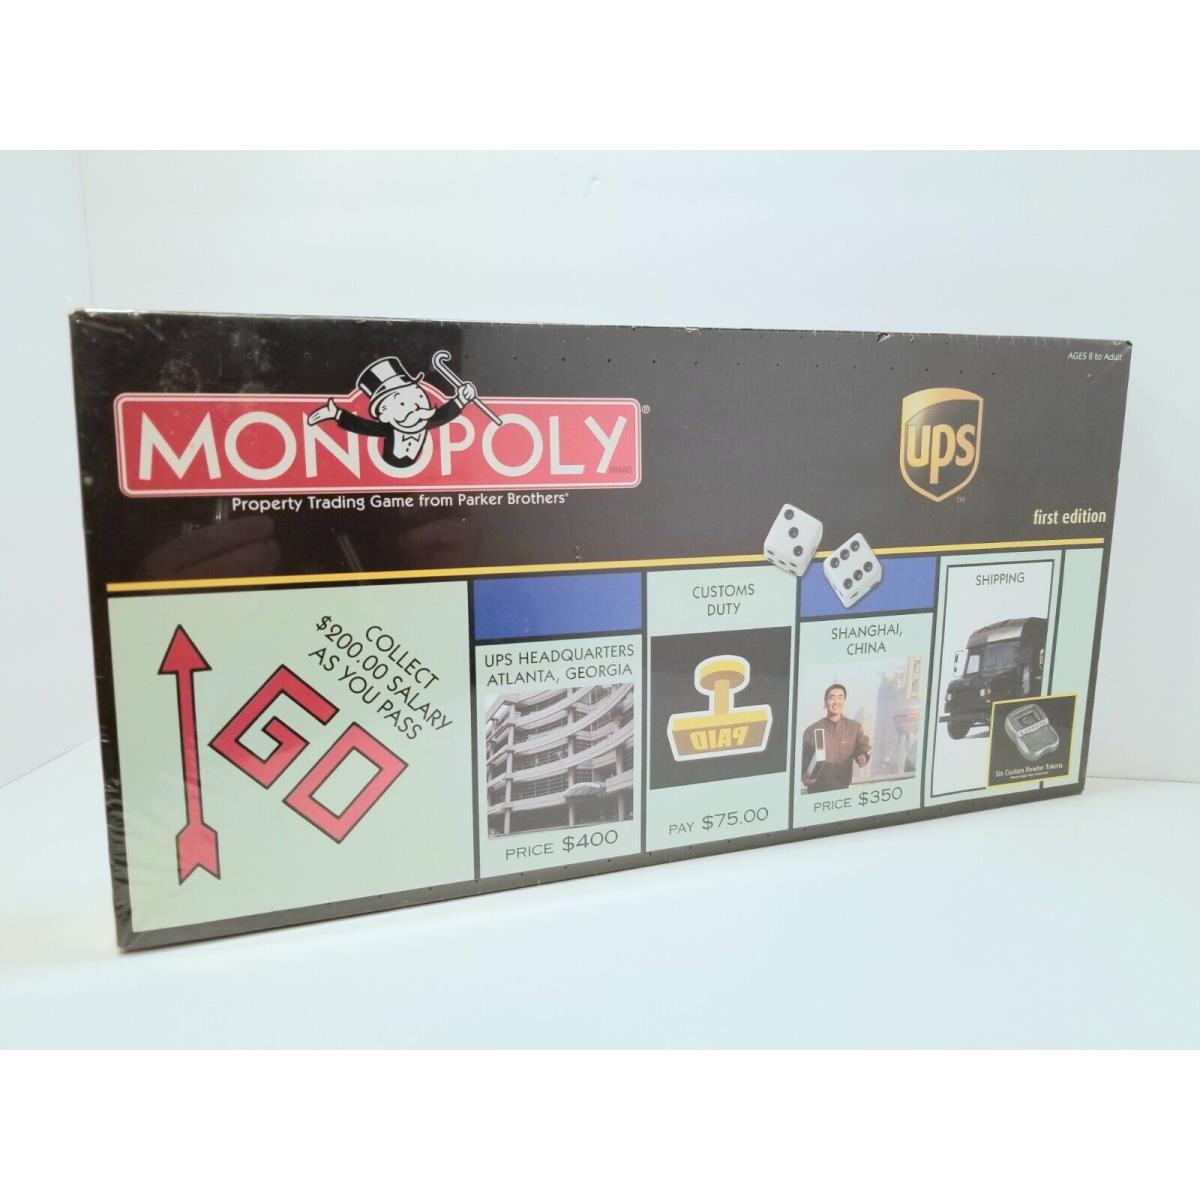 Hasbro Monopoly Ups United Parcel Service 1st Edition Board Game 2005